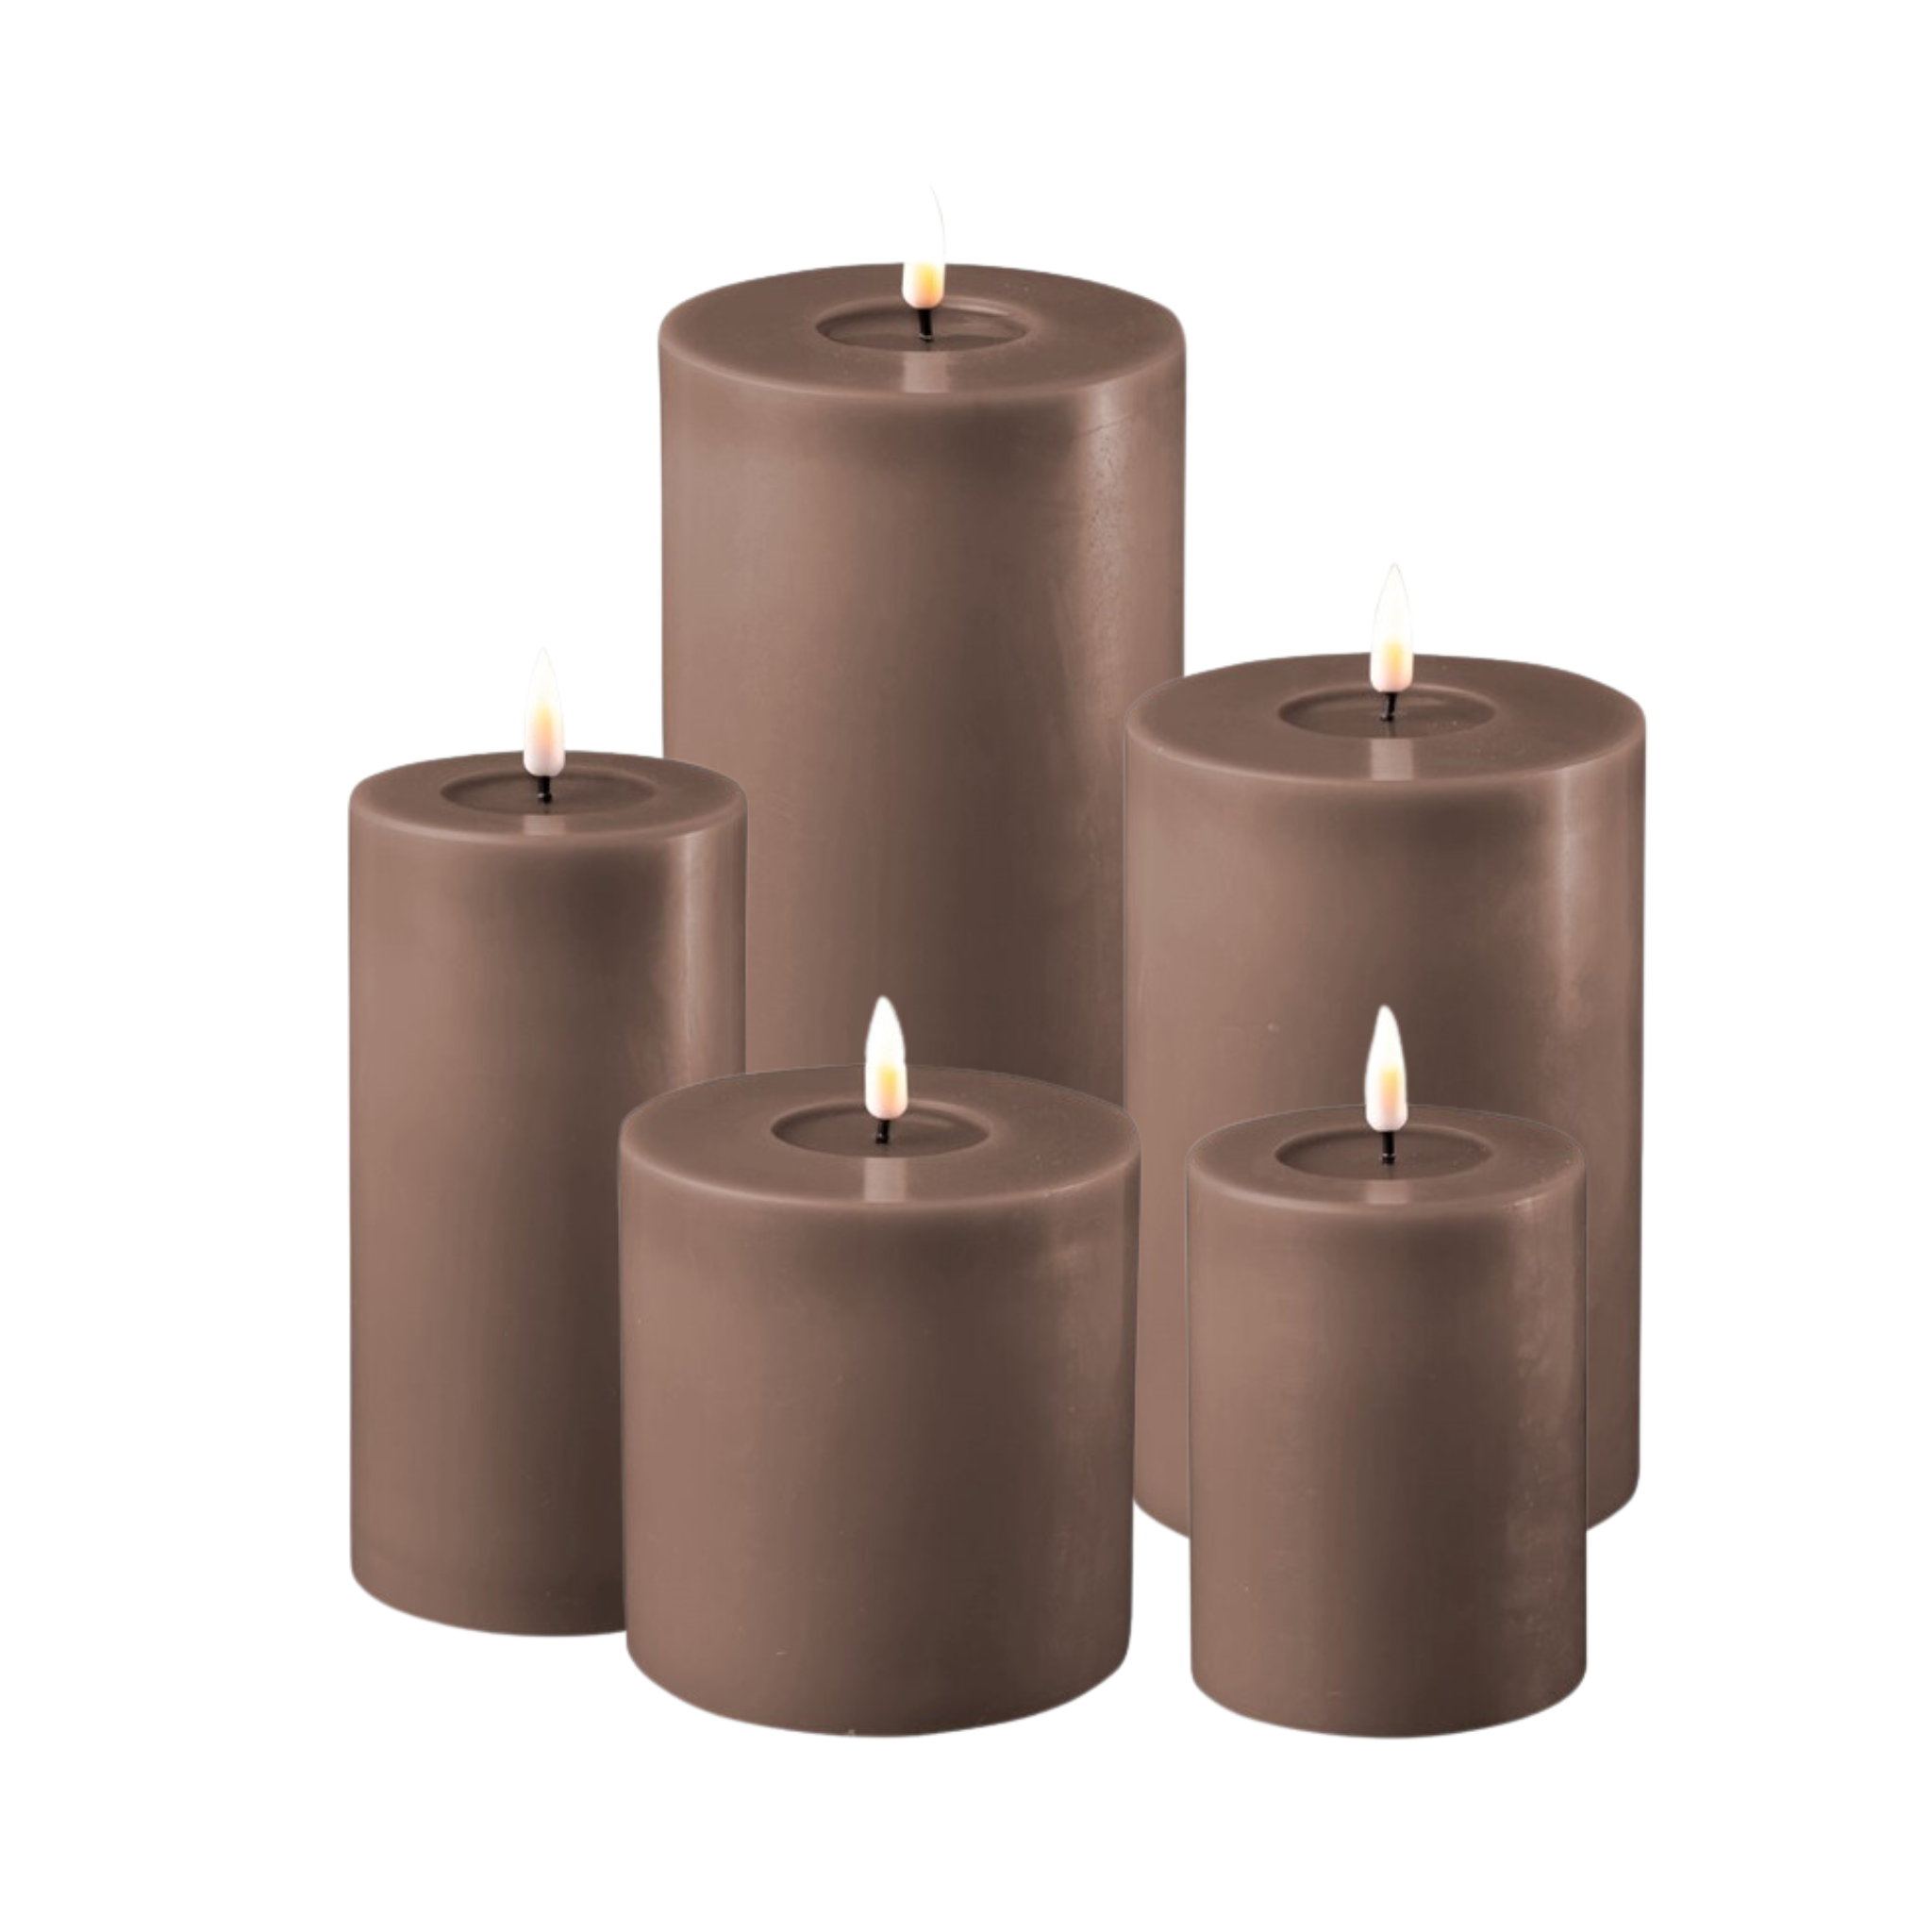 Deluxe Homeart LED Candle Set Indoor Mocha